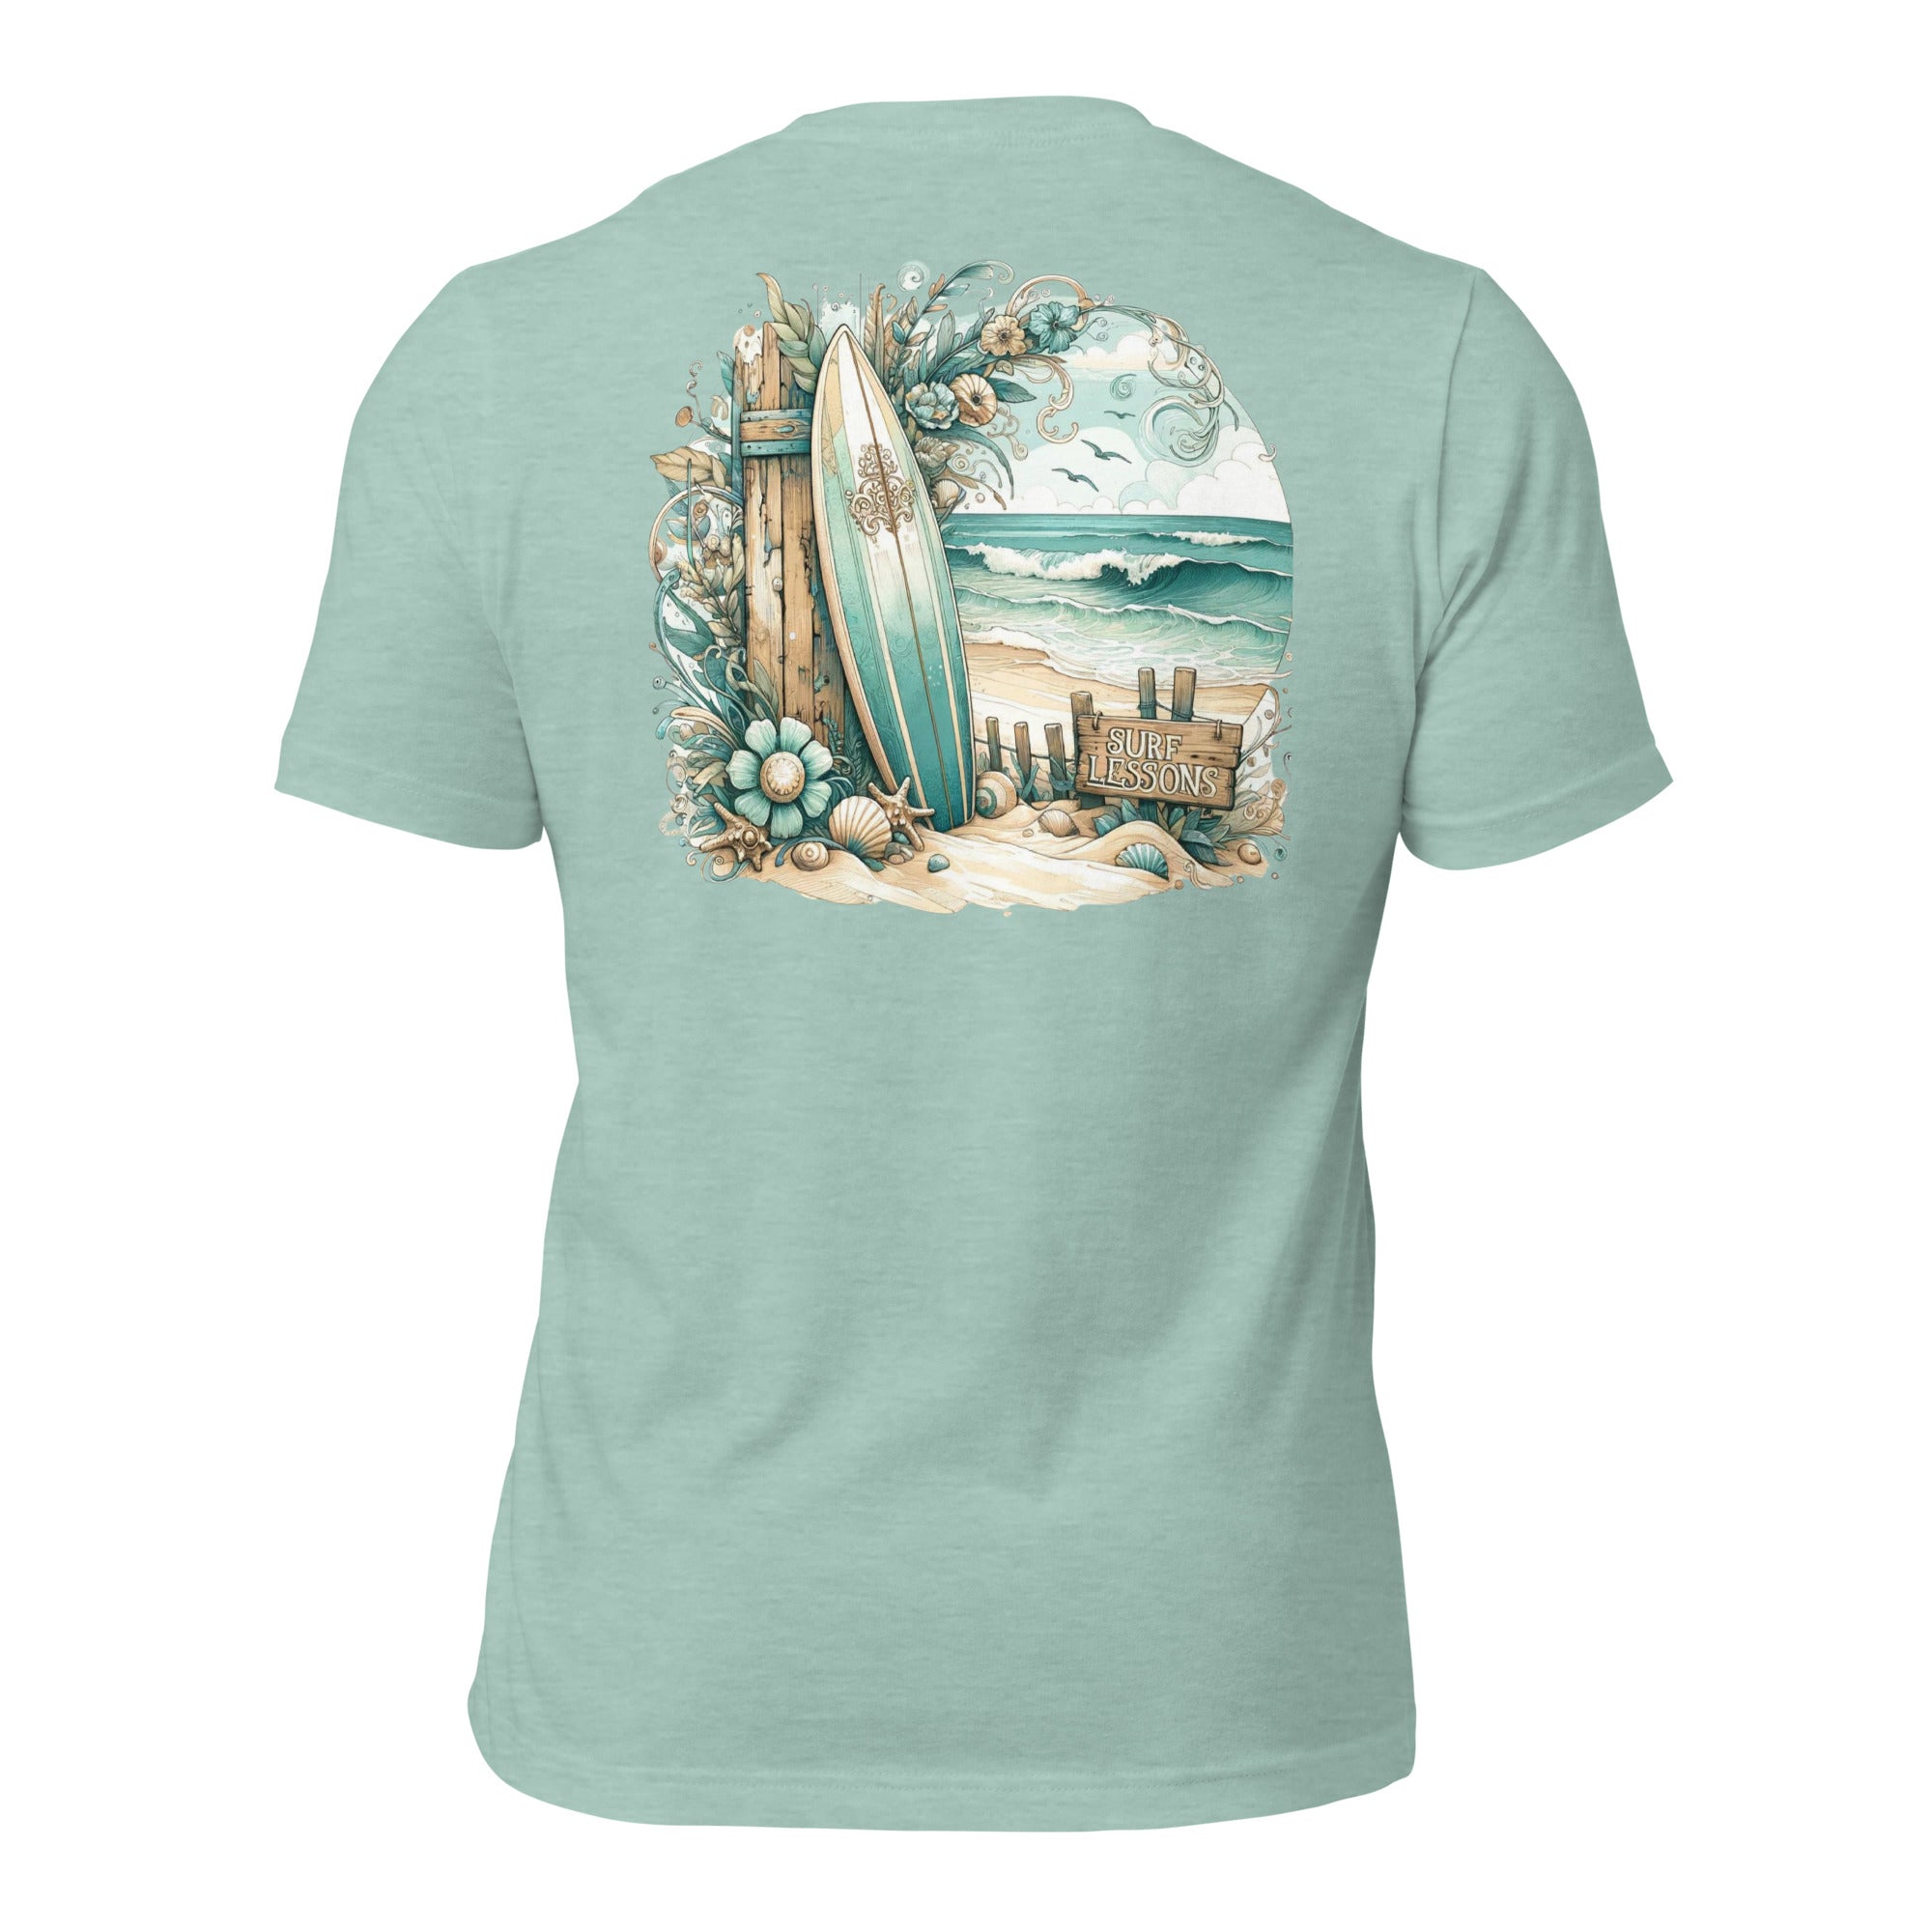 Ride the Wave in Style: Lucas Island Surf Lessons T-Shirt